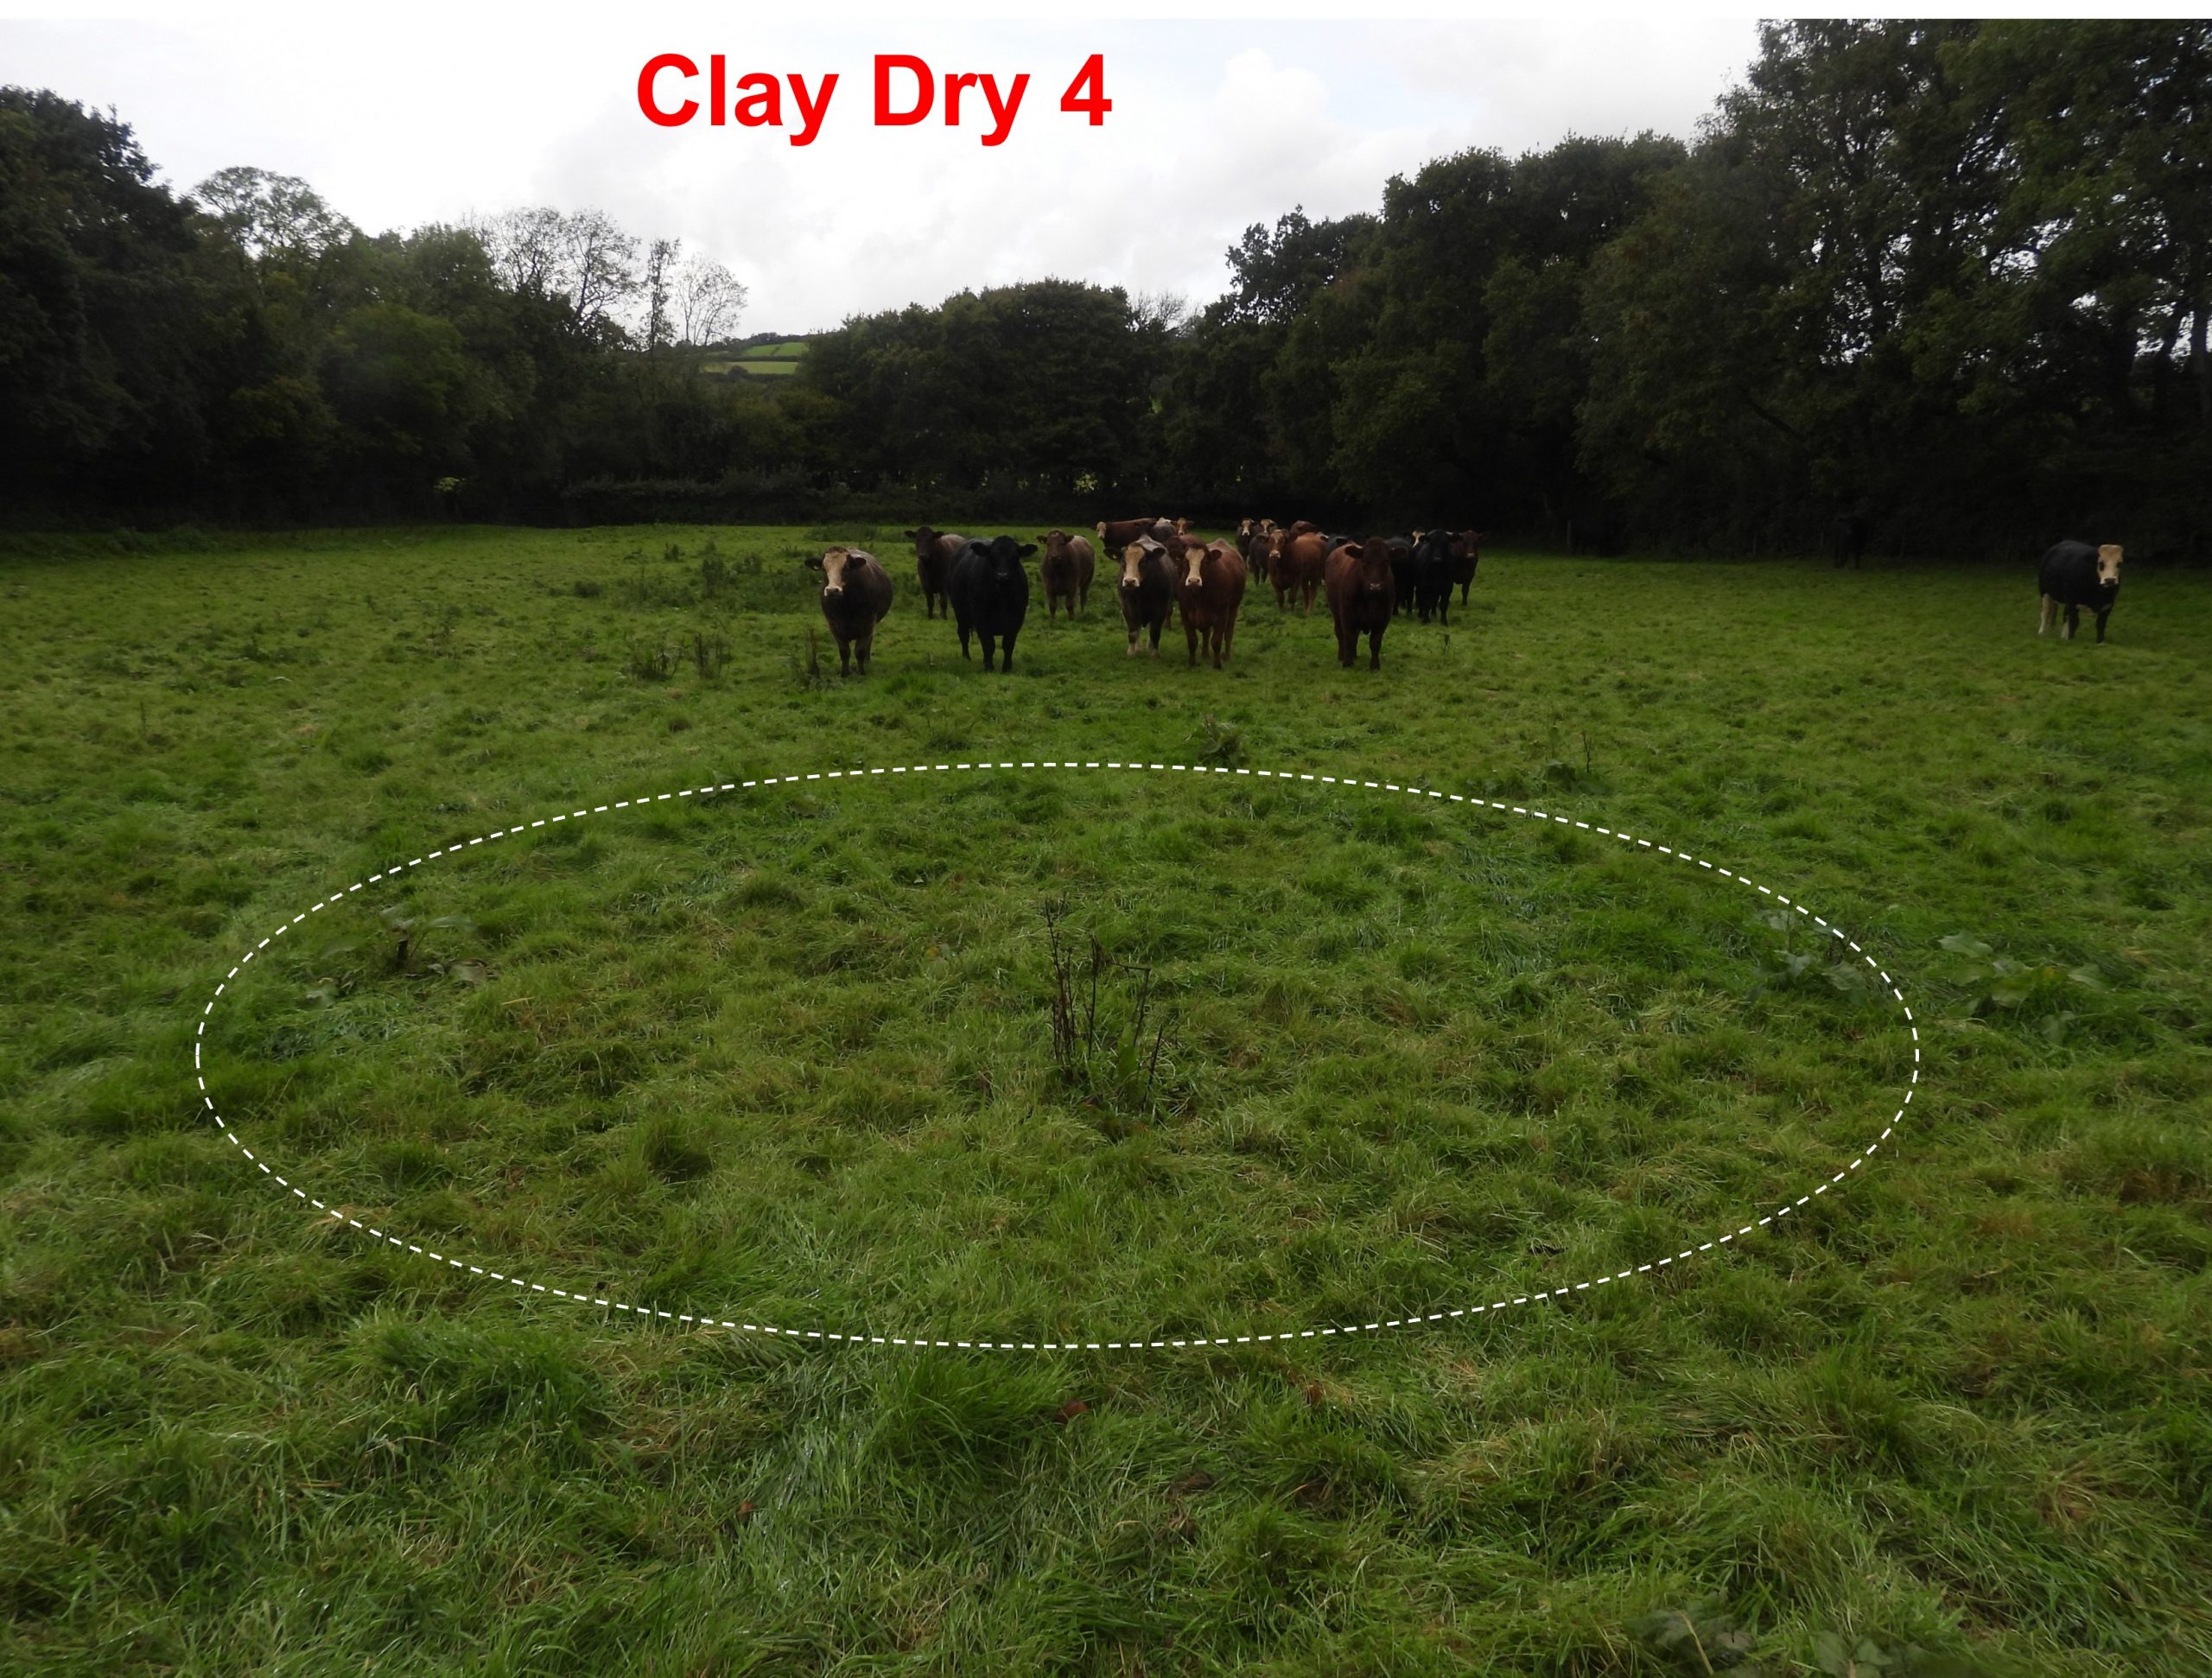 5. Clay Dry 4